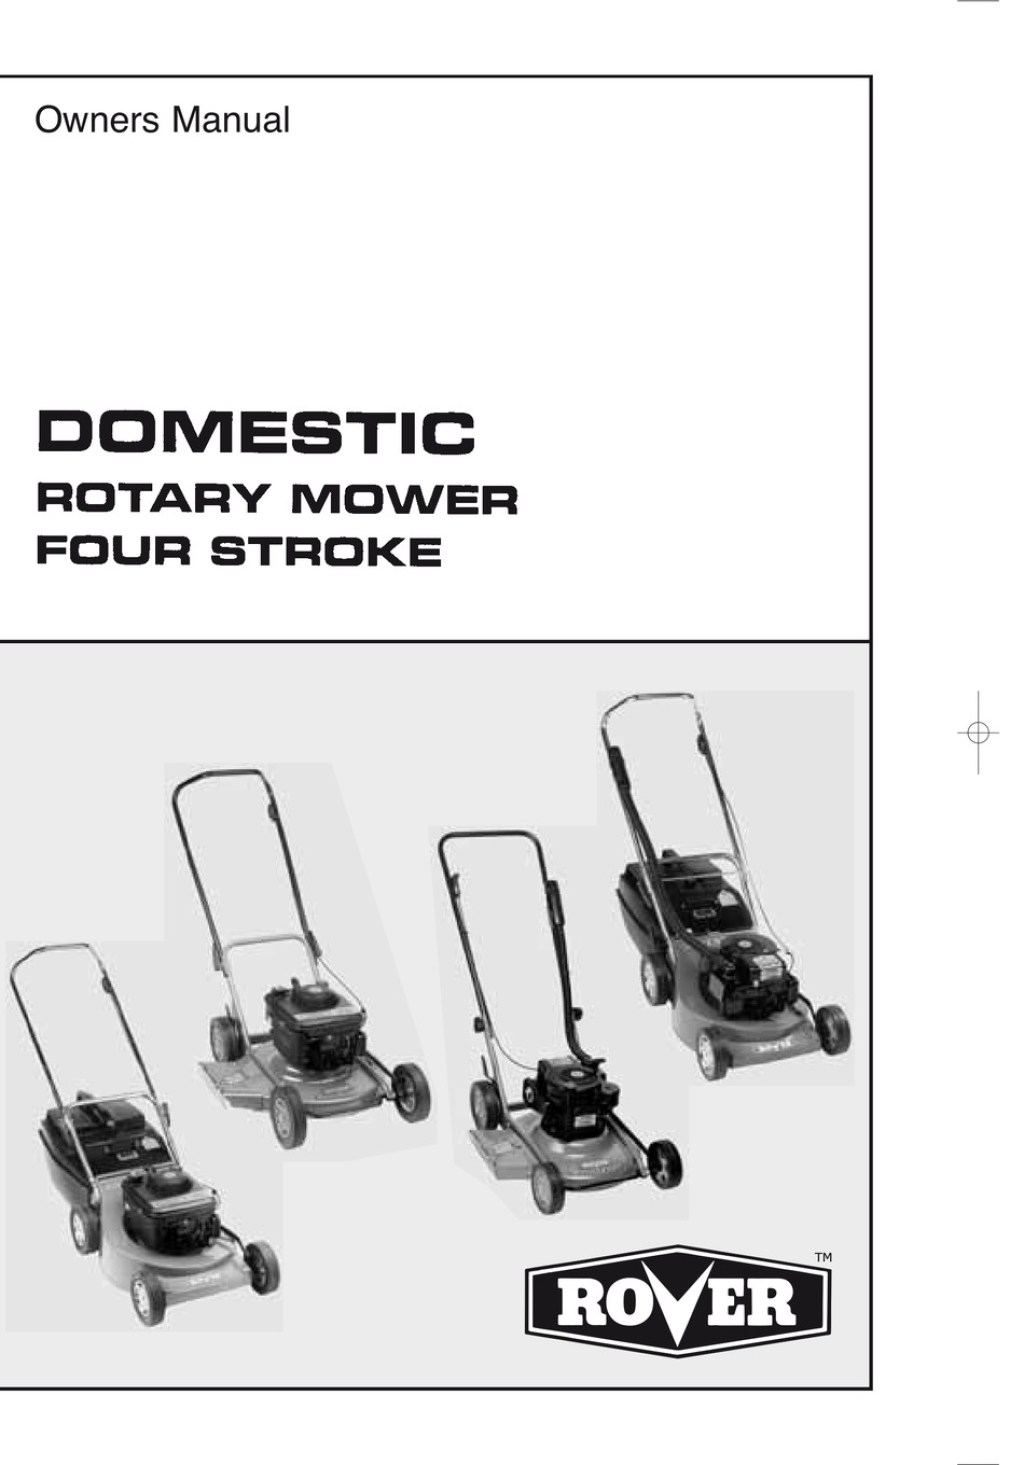 Picture of: ROVER DOMESTIC DOMESTIC ROTARY MOWER OWNER’S MANUAL Pdf Download